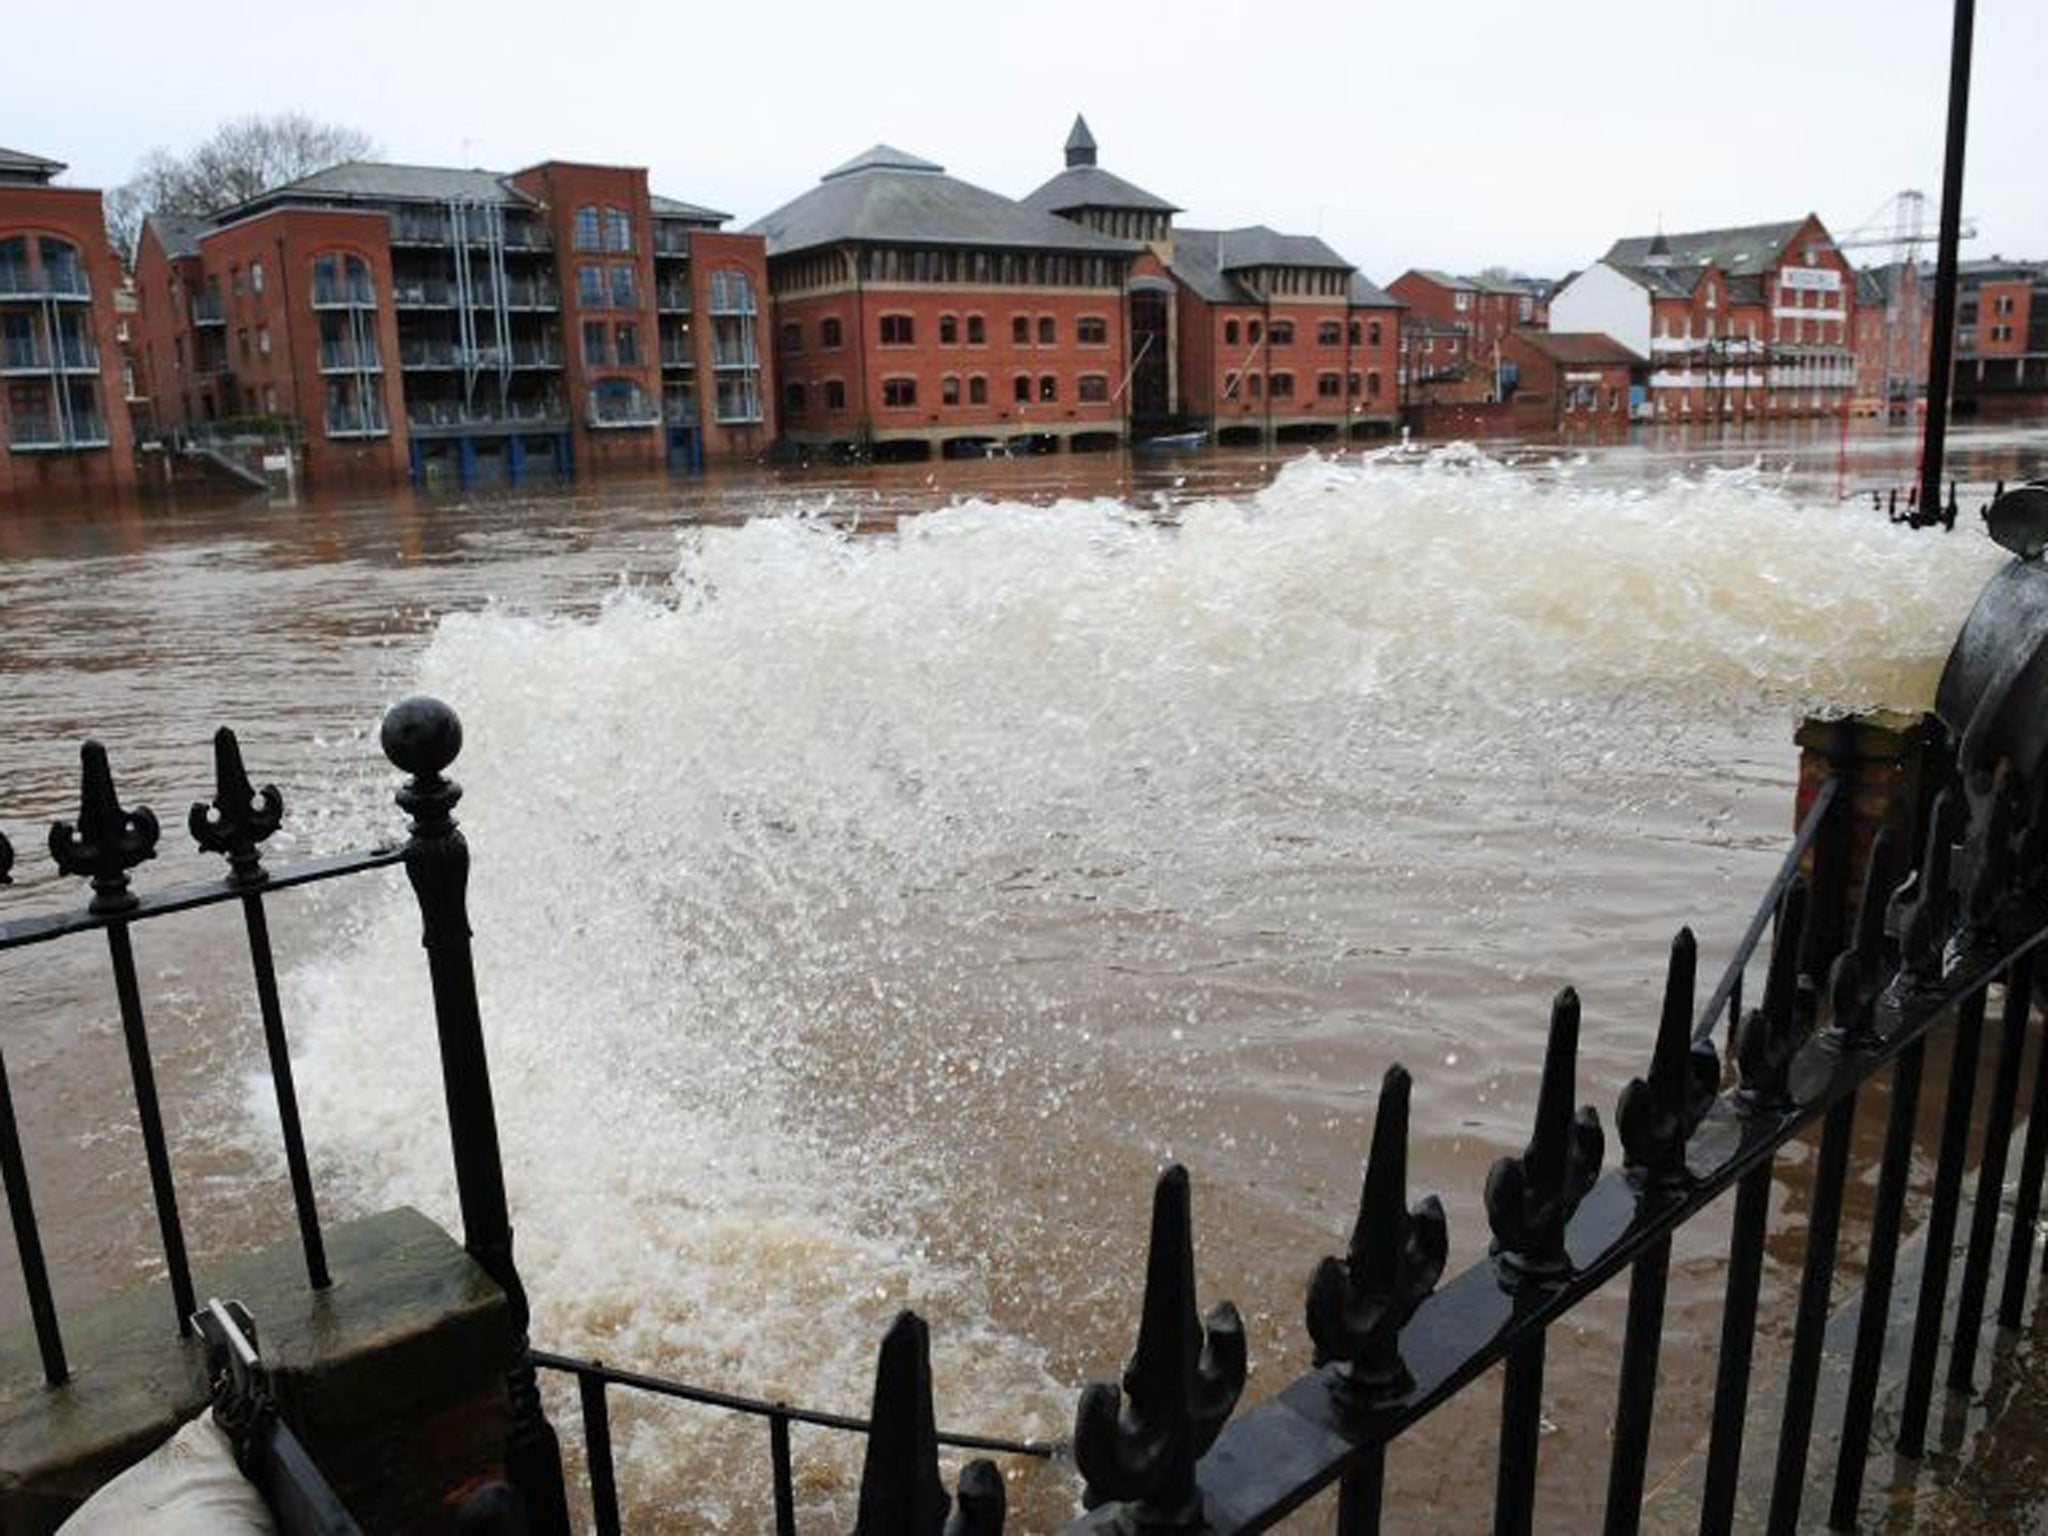 Pumps are used to help stop water from flooding homes in York city centre, after the River Ouse burst its banks following heavy rainfall over the Christmas period